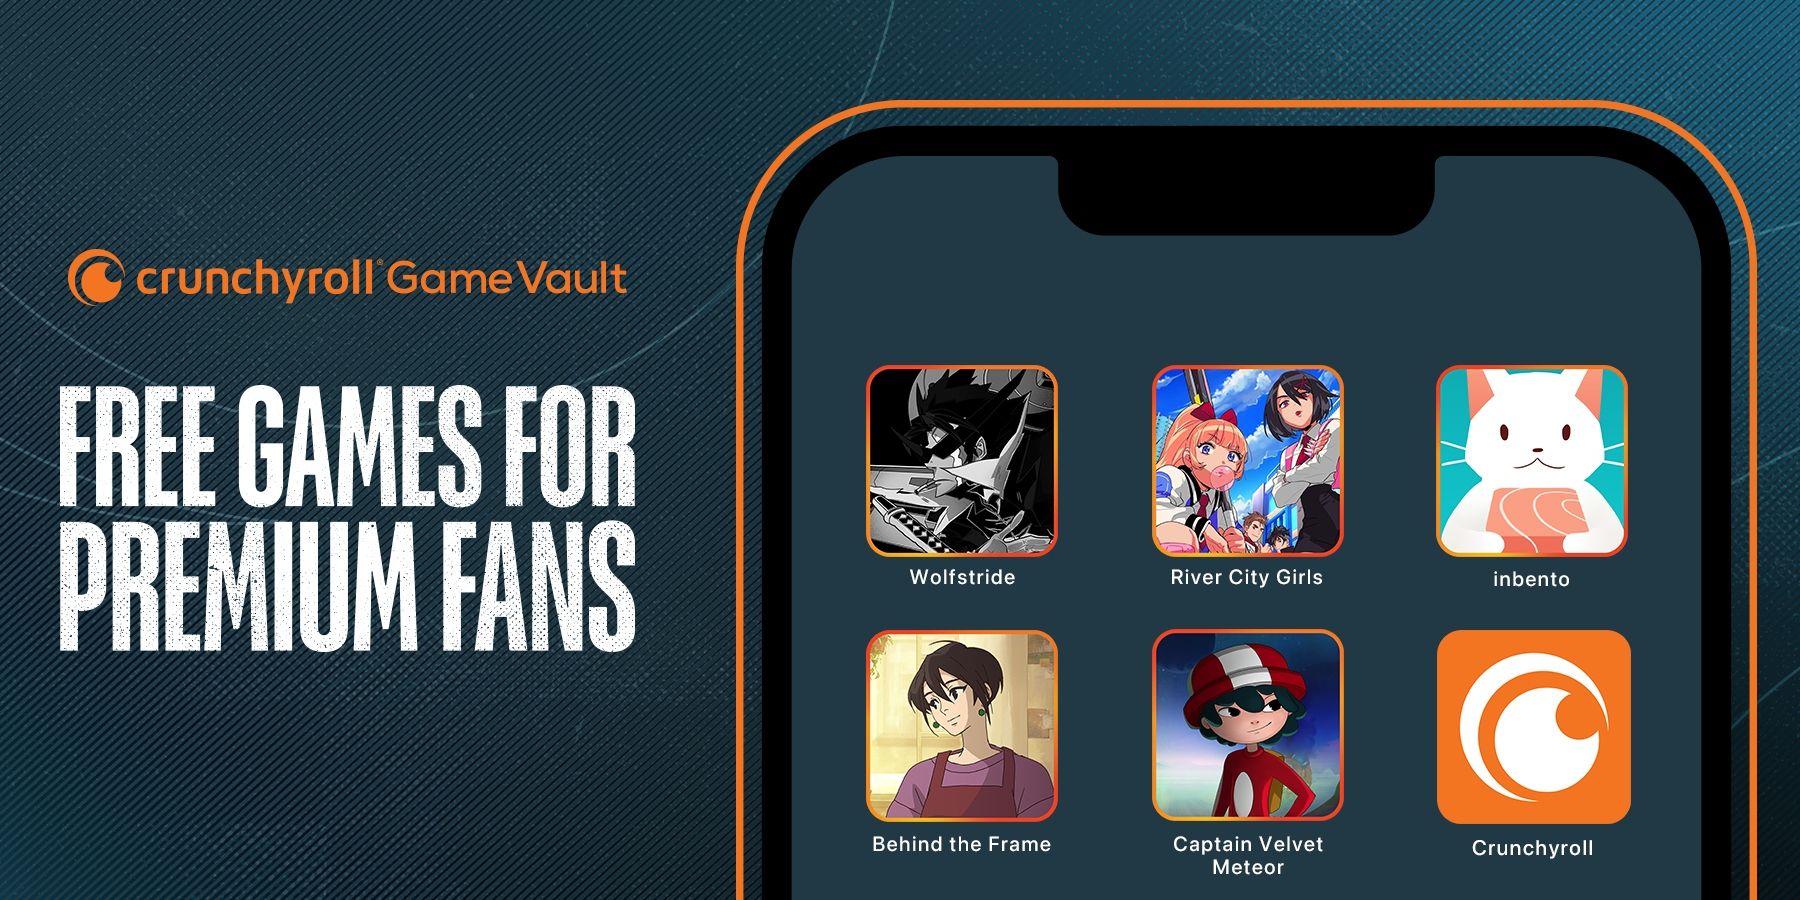 Crunchyroll Launches Anime Streaming Service in Spain and Portugal